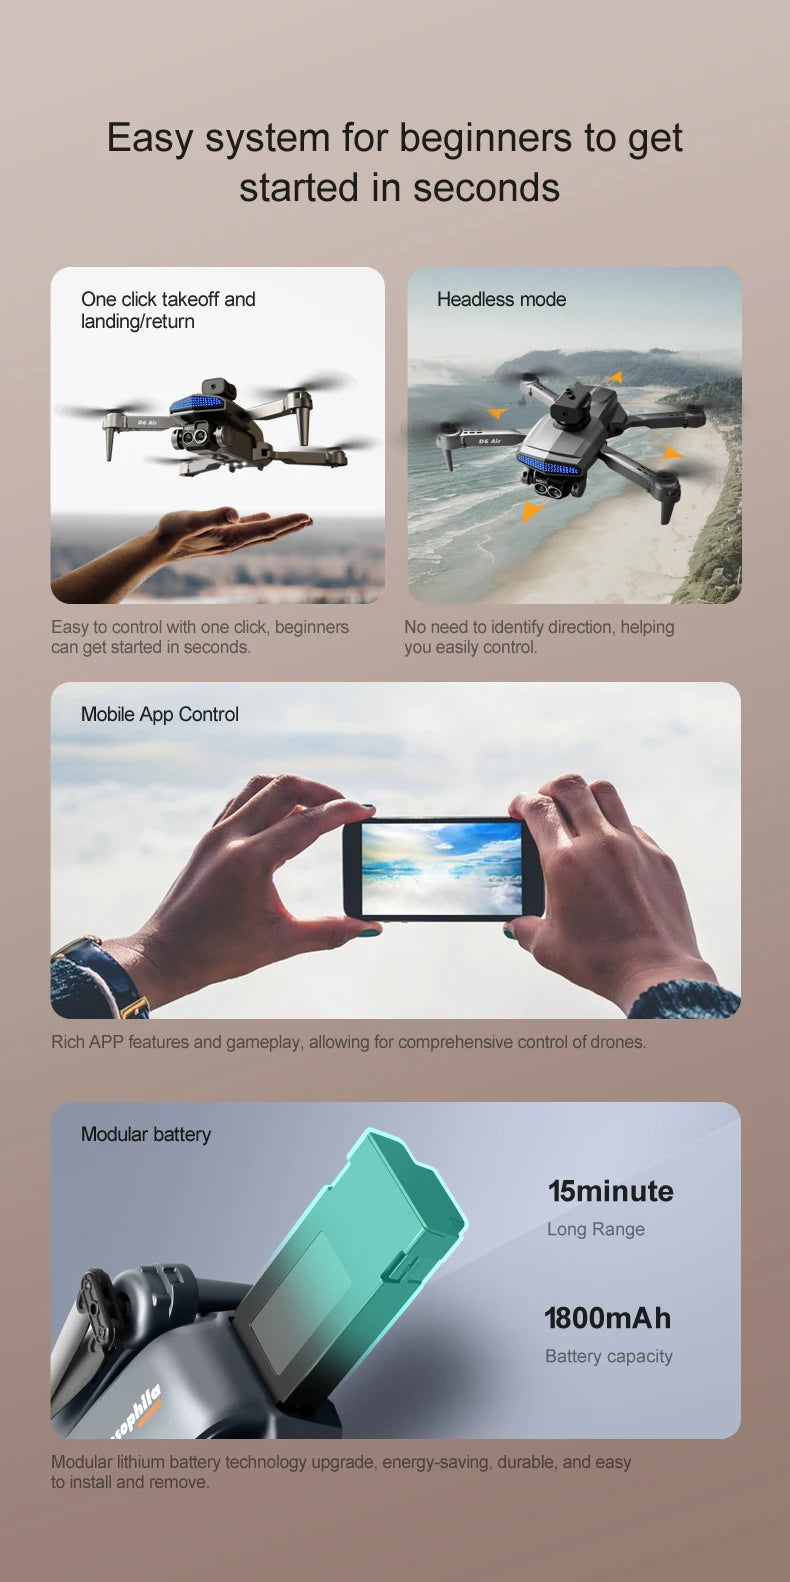 D6 Drone - 8K Professional Dual Camera, d6 drone, easy system for beginners to get started in seconds one click takeoff and